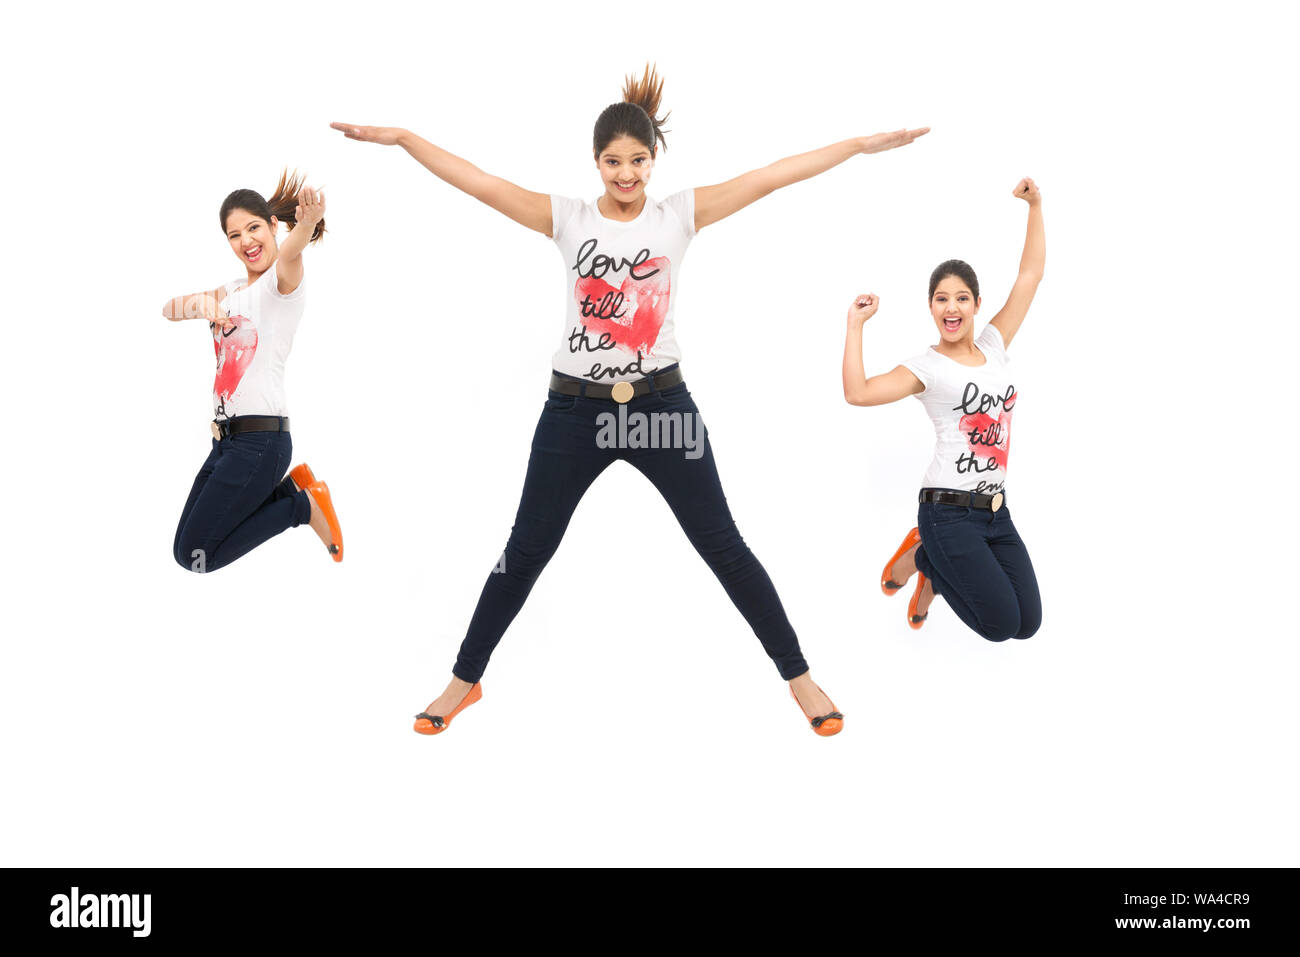 Multiple images of a young woman jumping in air Stock Photo